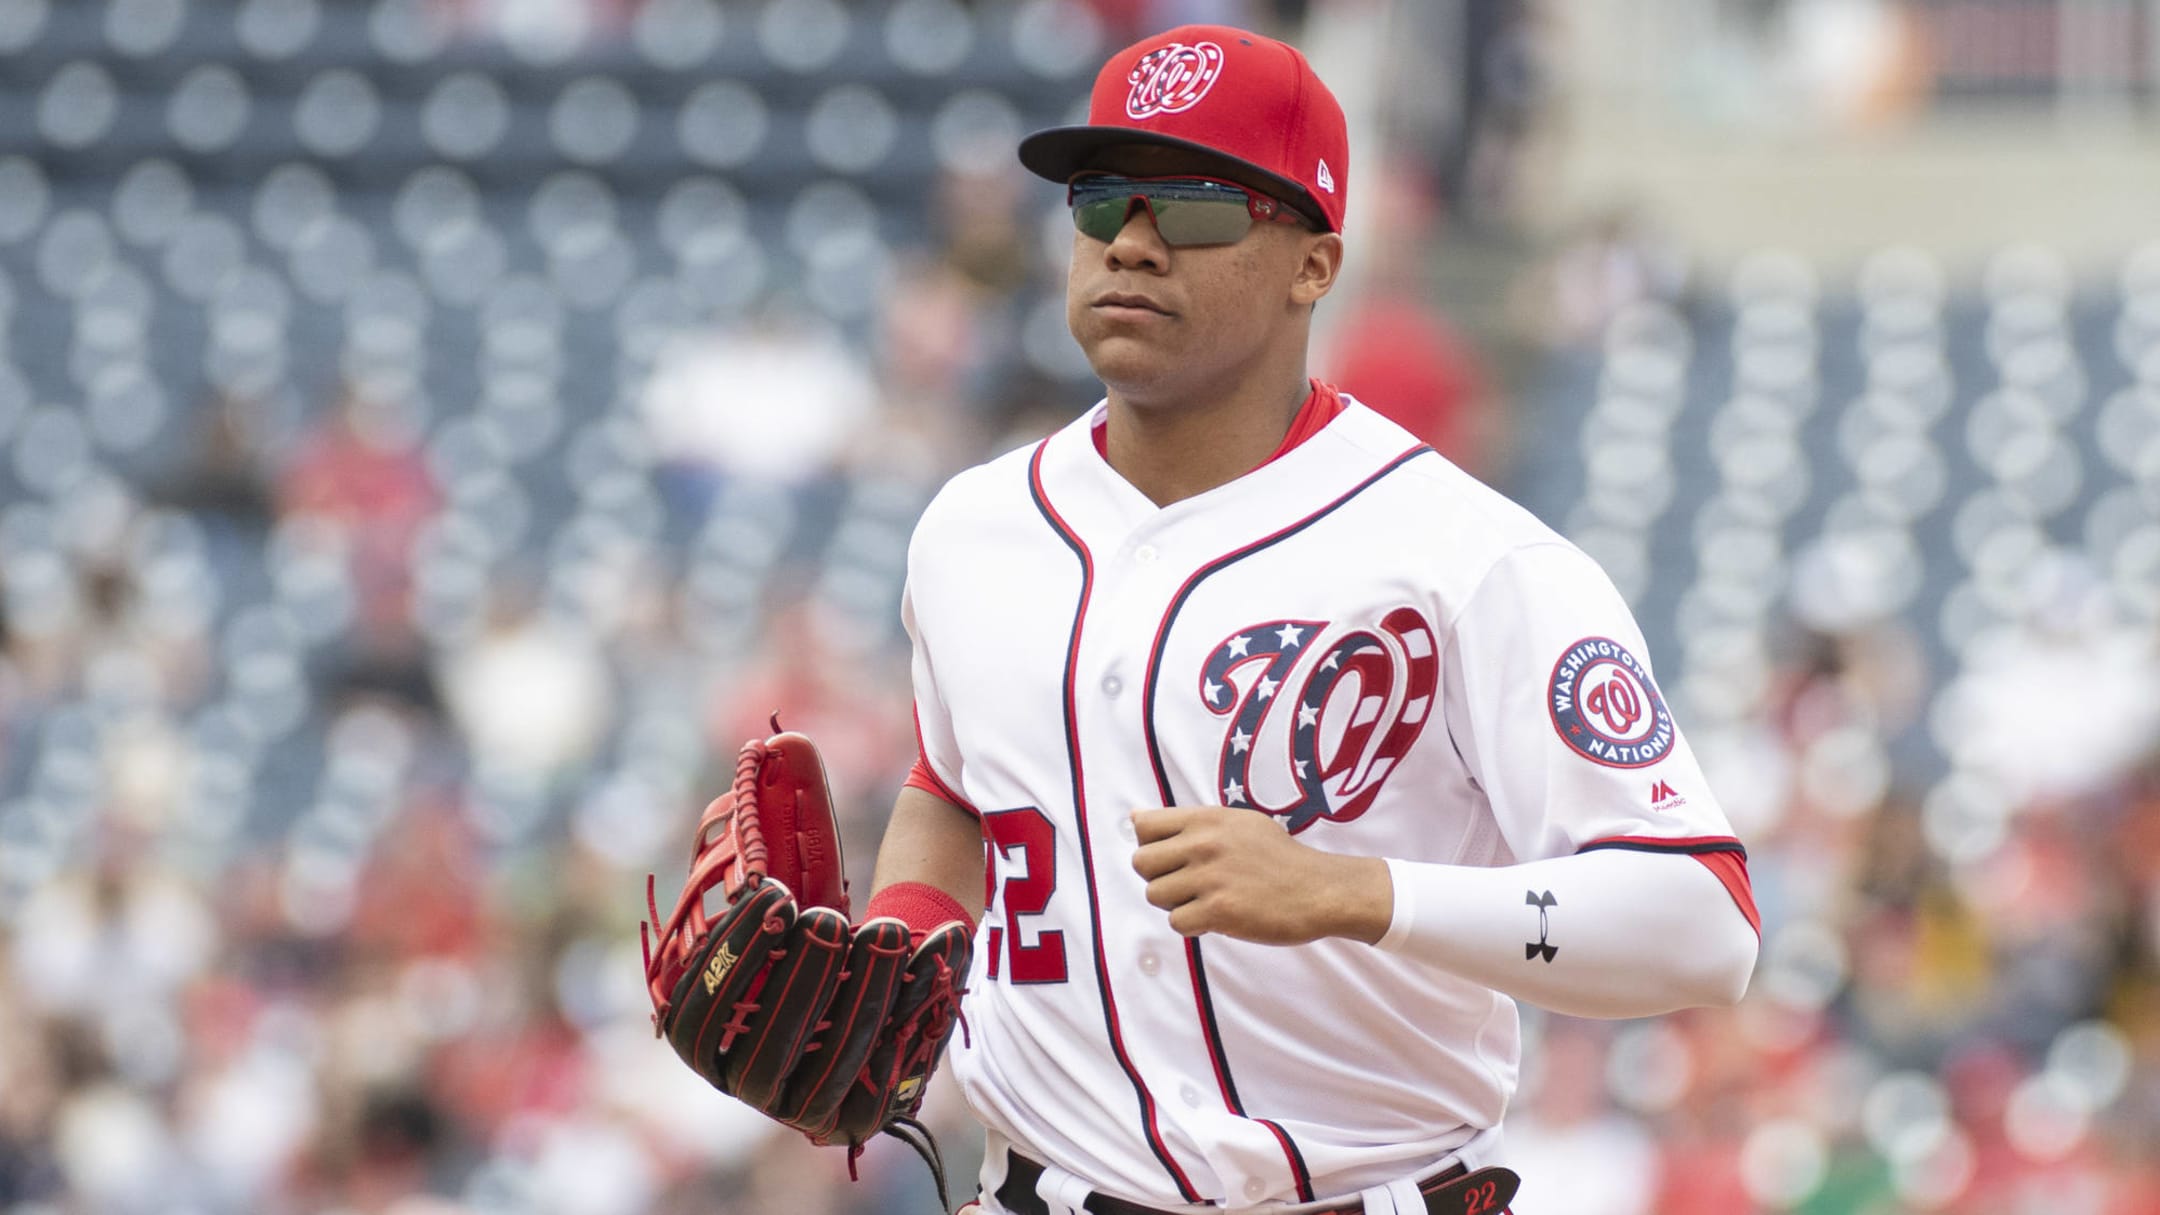 Juan Soto's debut reminds us that Bartolo Colon is old and so are